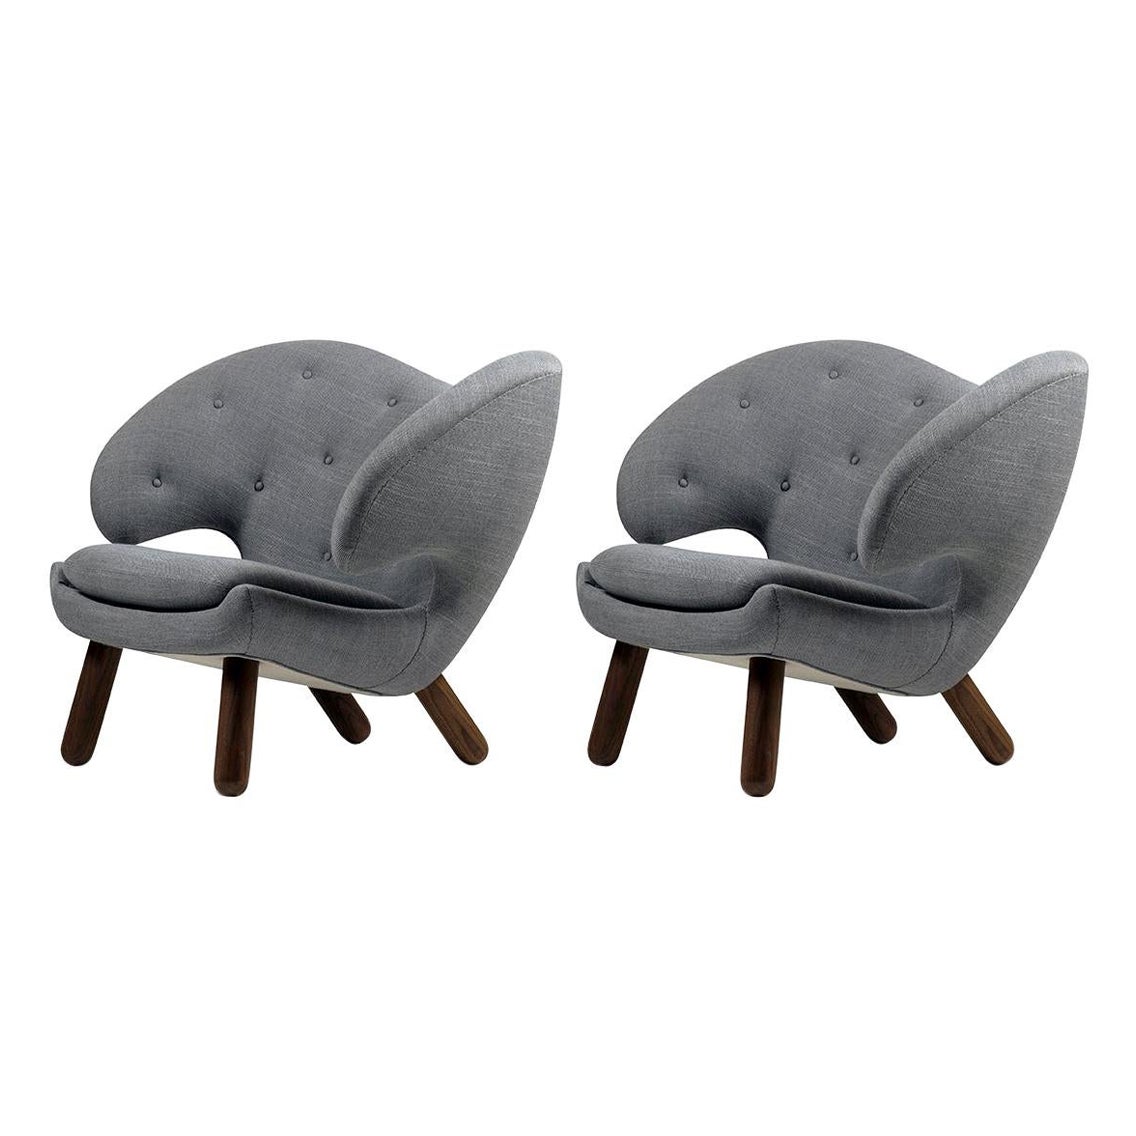 Set of Two Pelican Chairs by Finn Juhl in Fabric and Wood